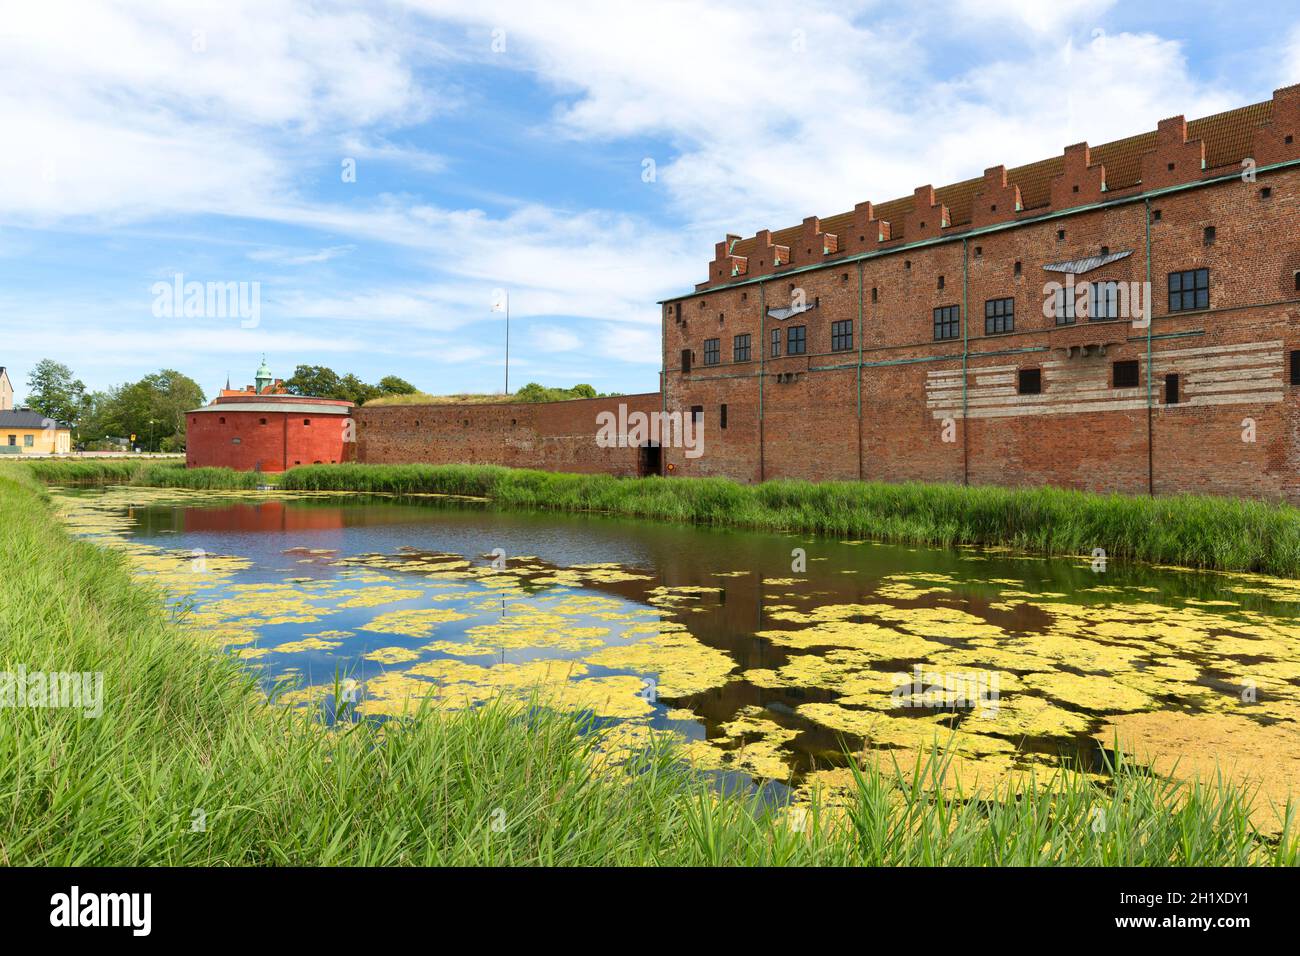 Malmo, Sweden - June 24, 2019: Malmo castle, 15th century fortress surrounded by a moat Stock Photo